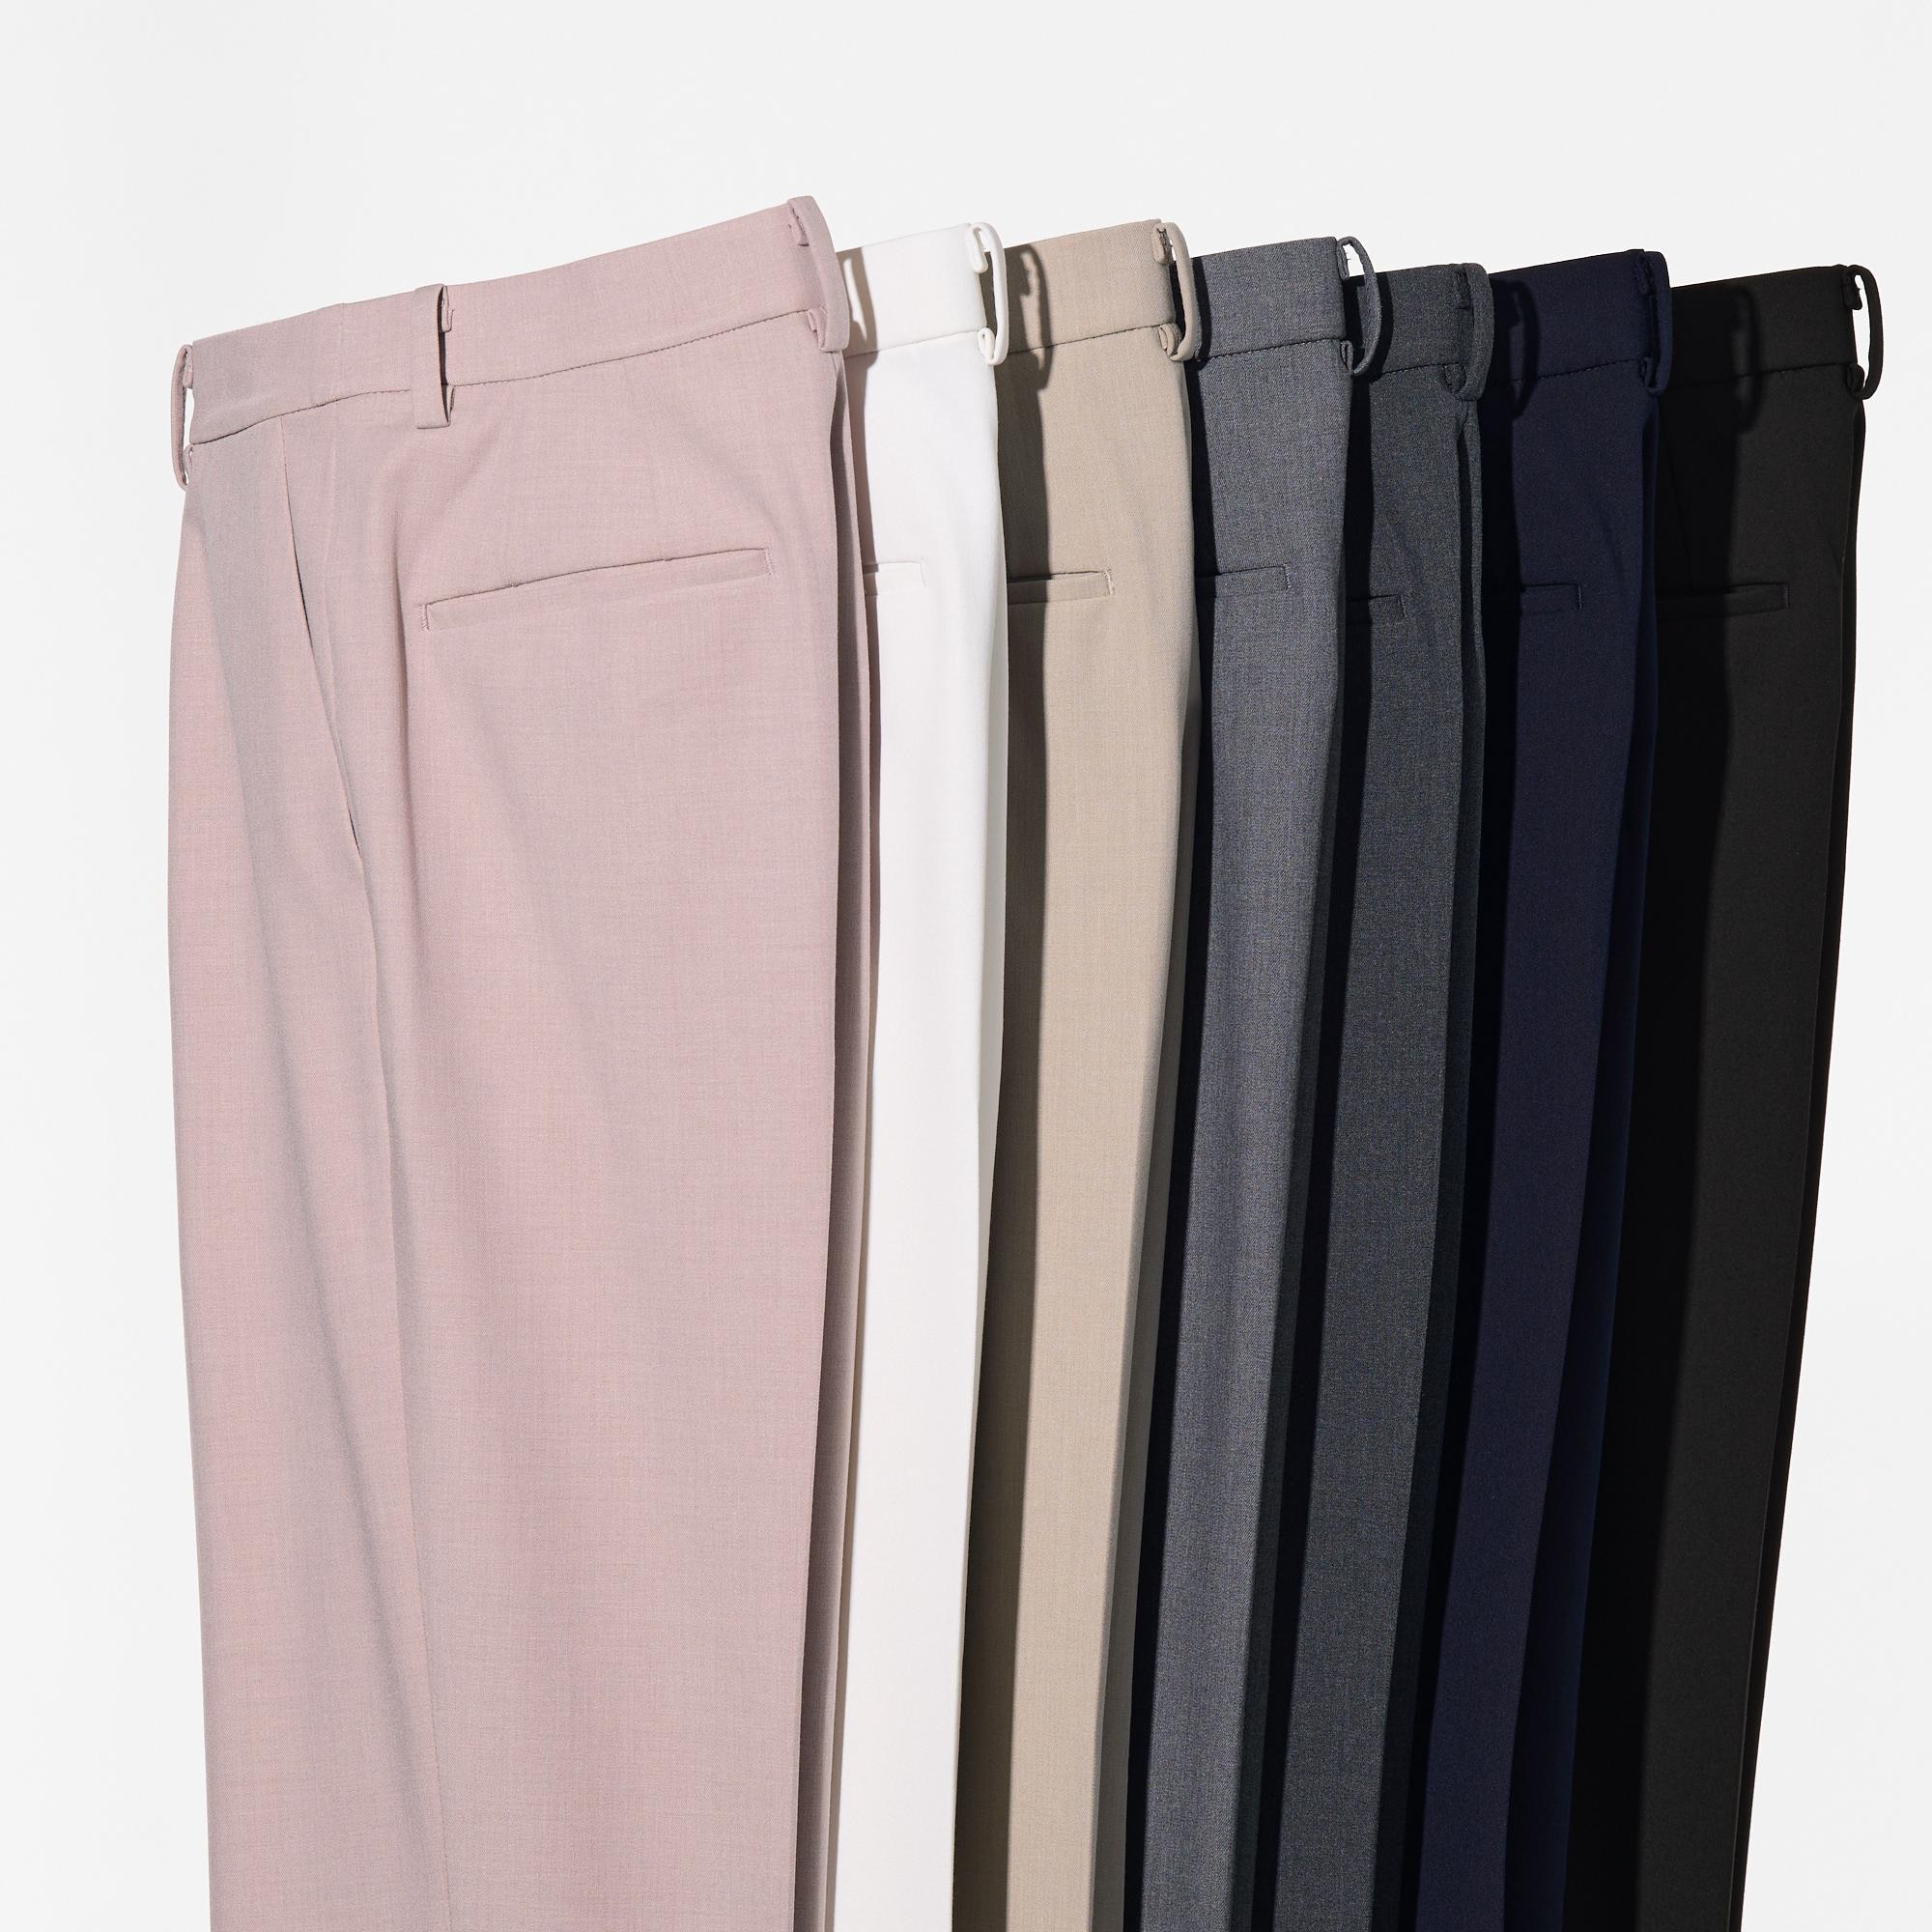 Ladies Smart Tapered Leg Trousers Lightweight Work Office Pants